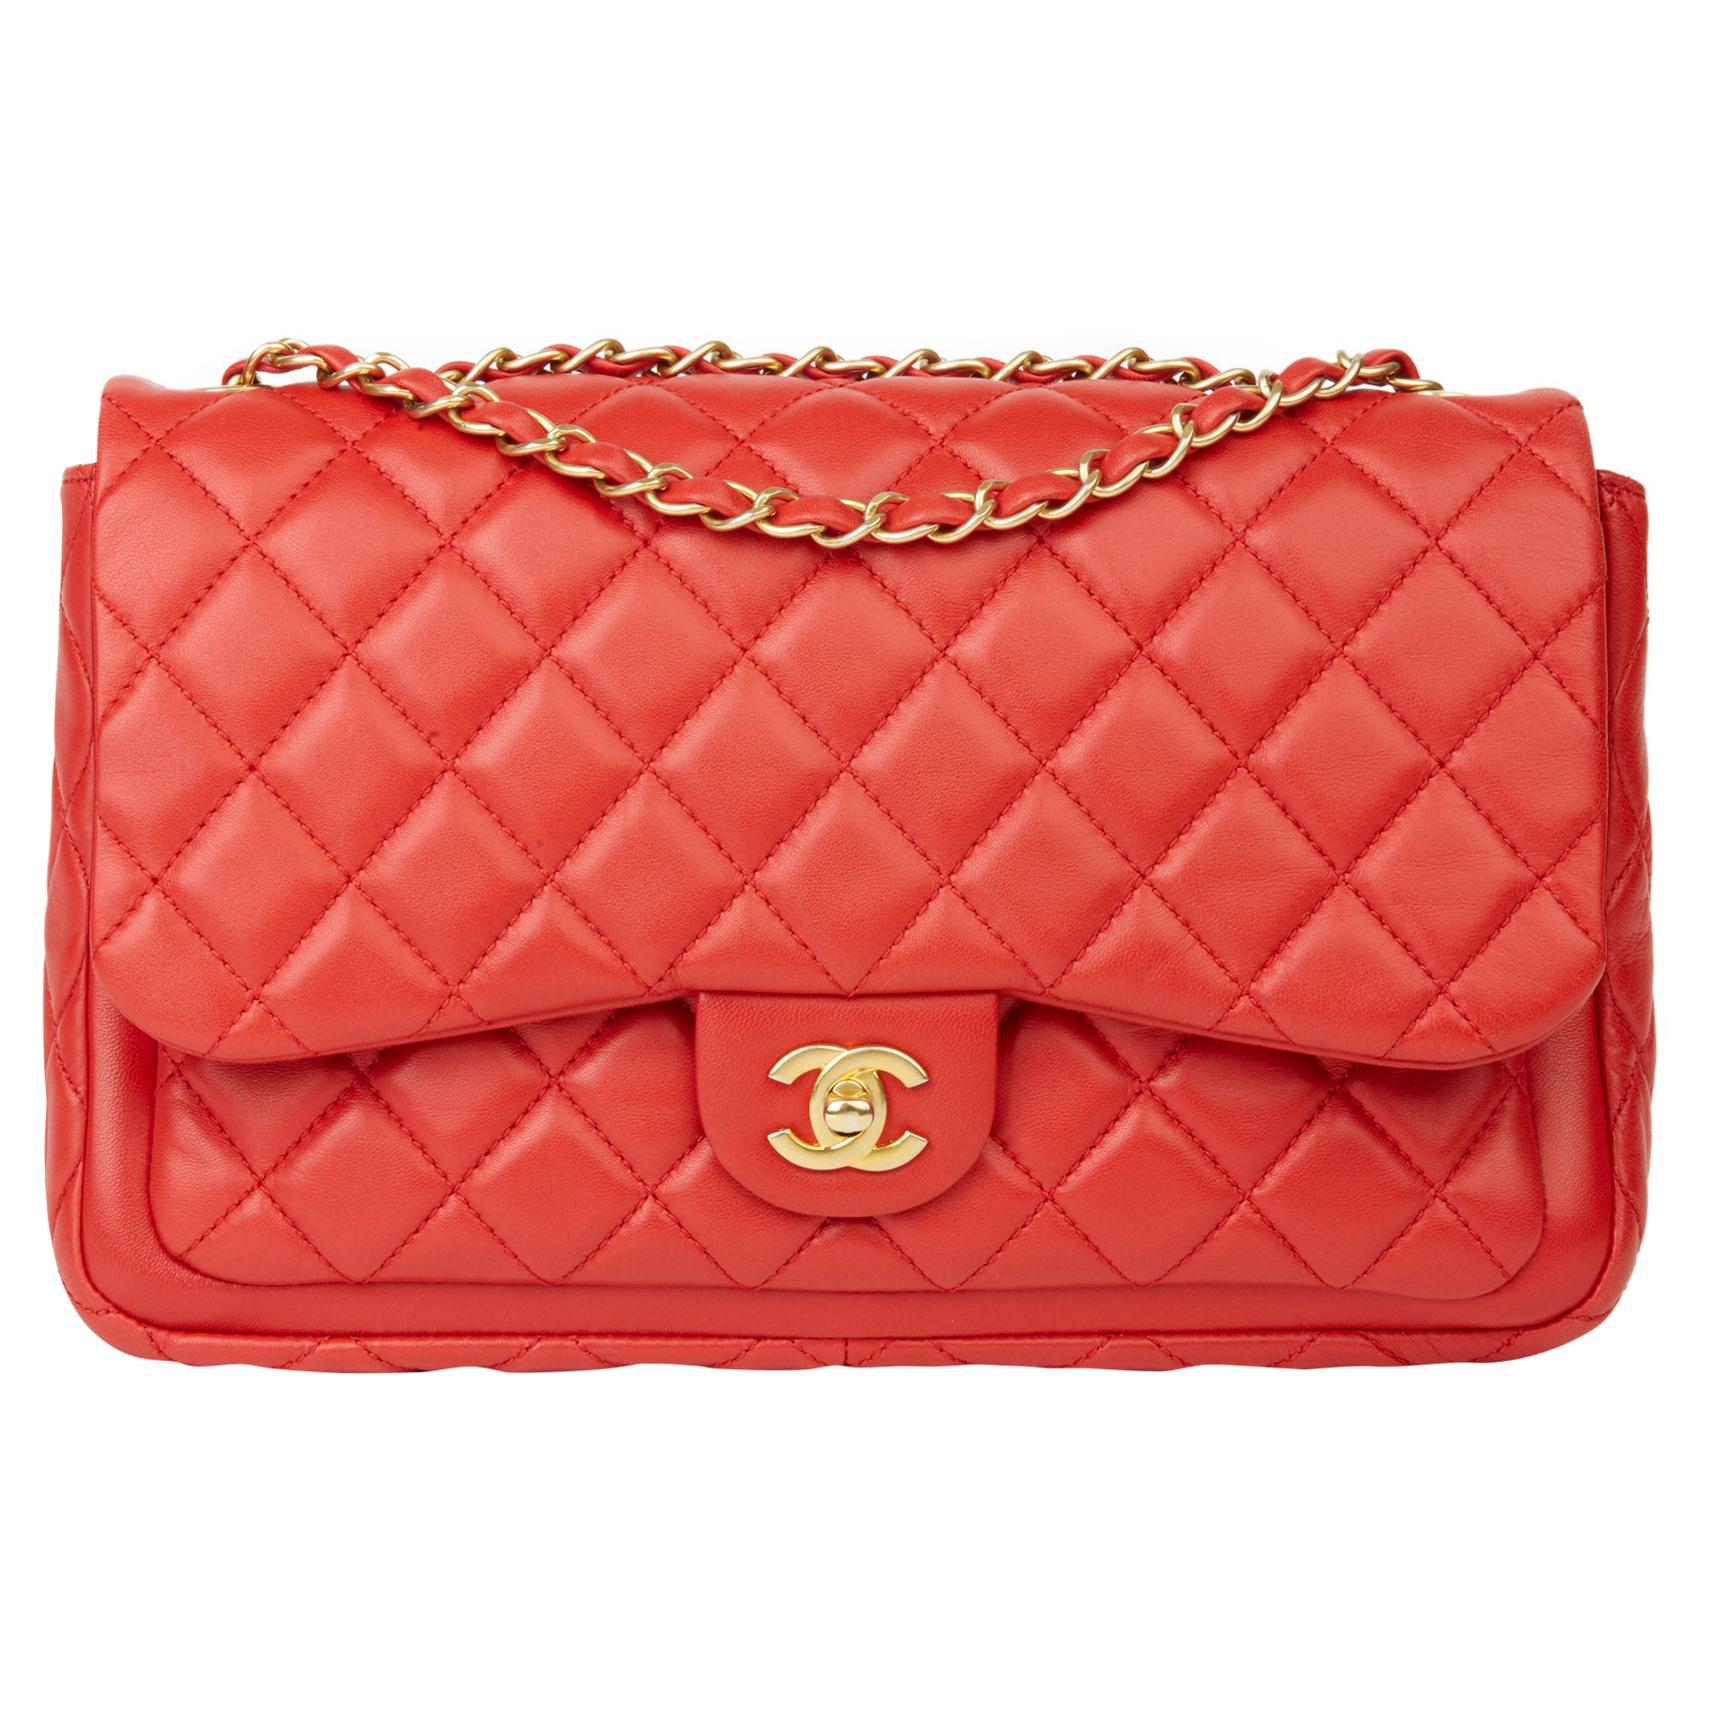 2014 Chanel Lipstick Red Quilted Lambskin Classic Single Flap Bag